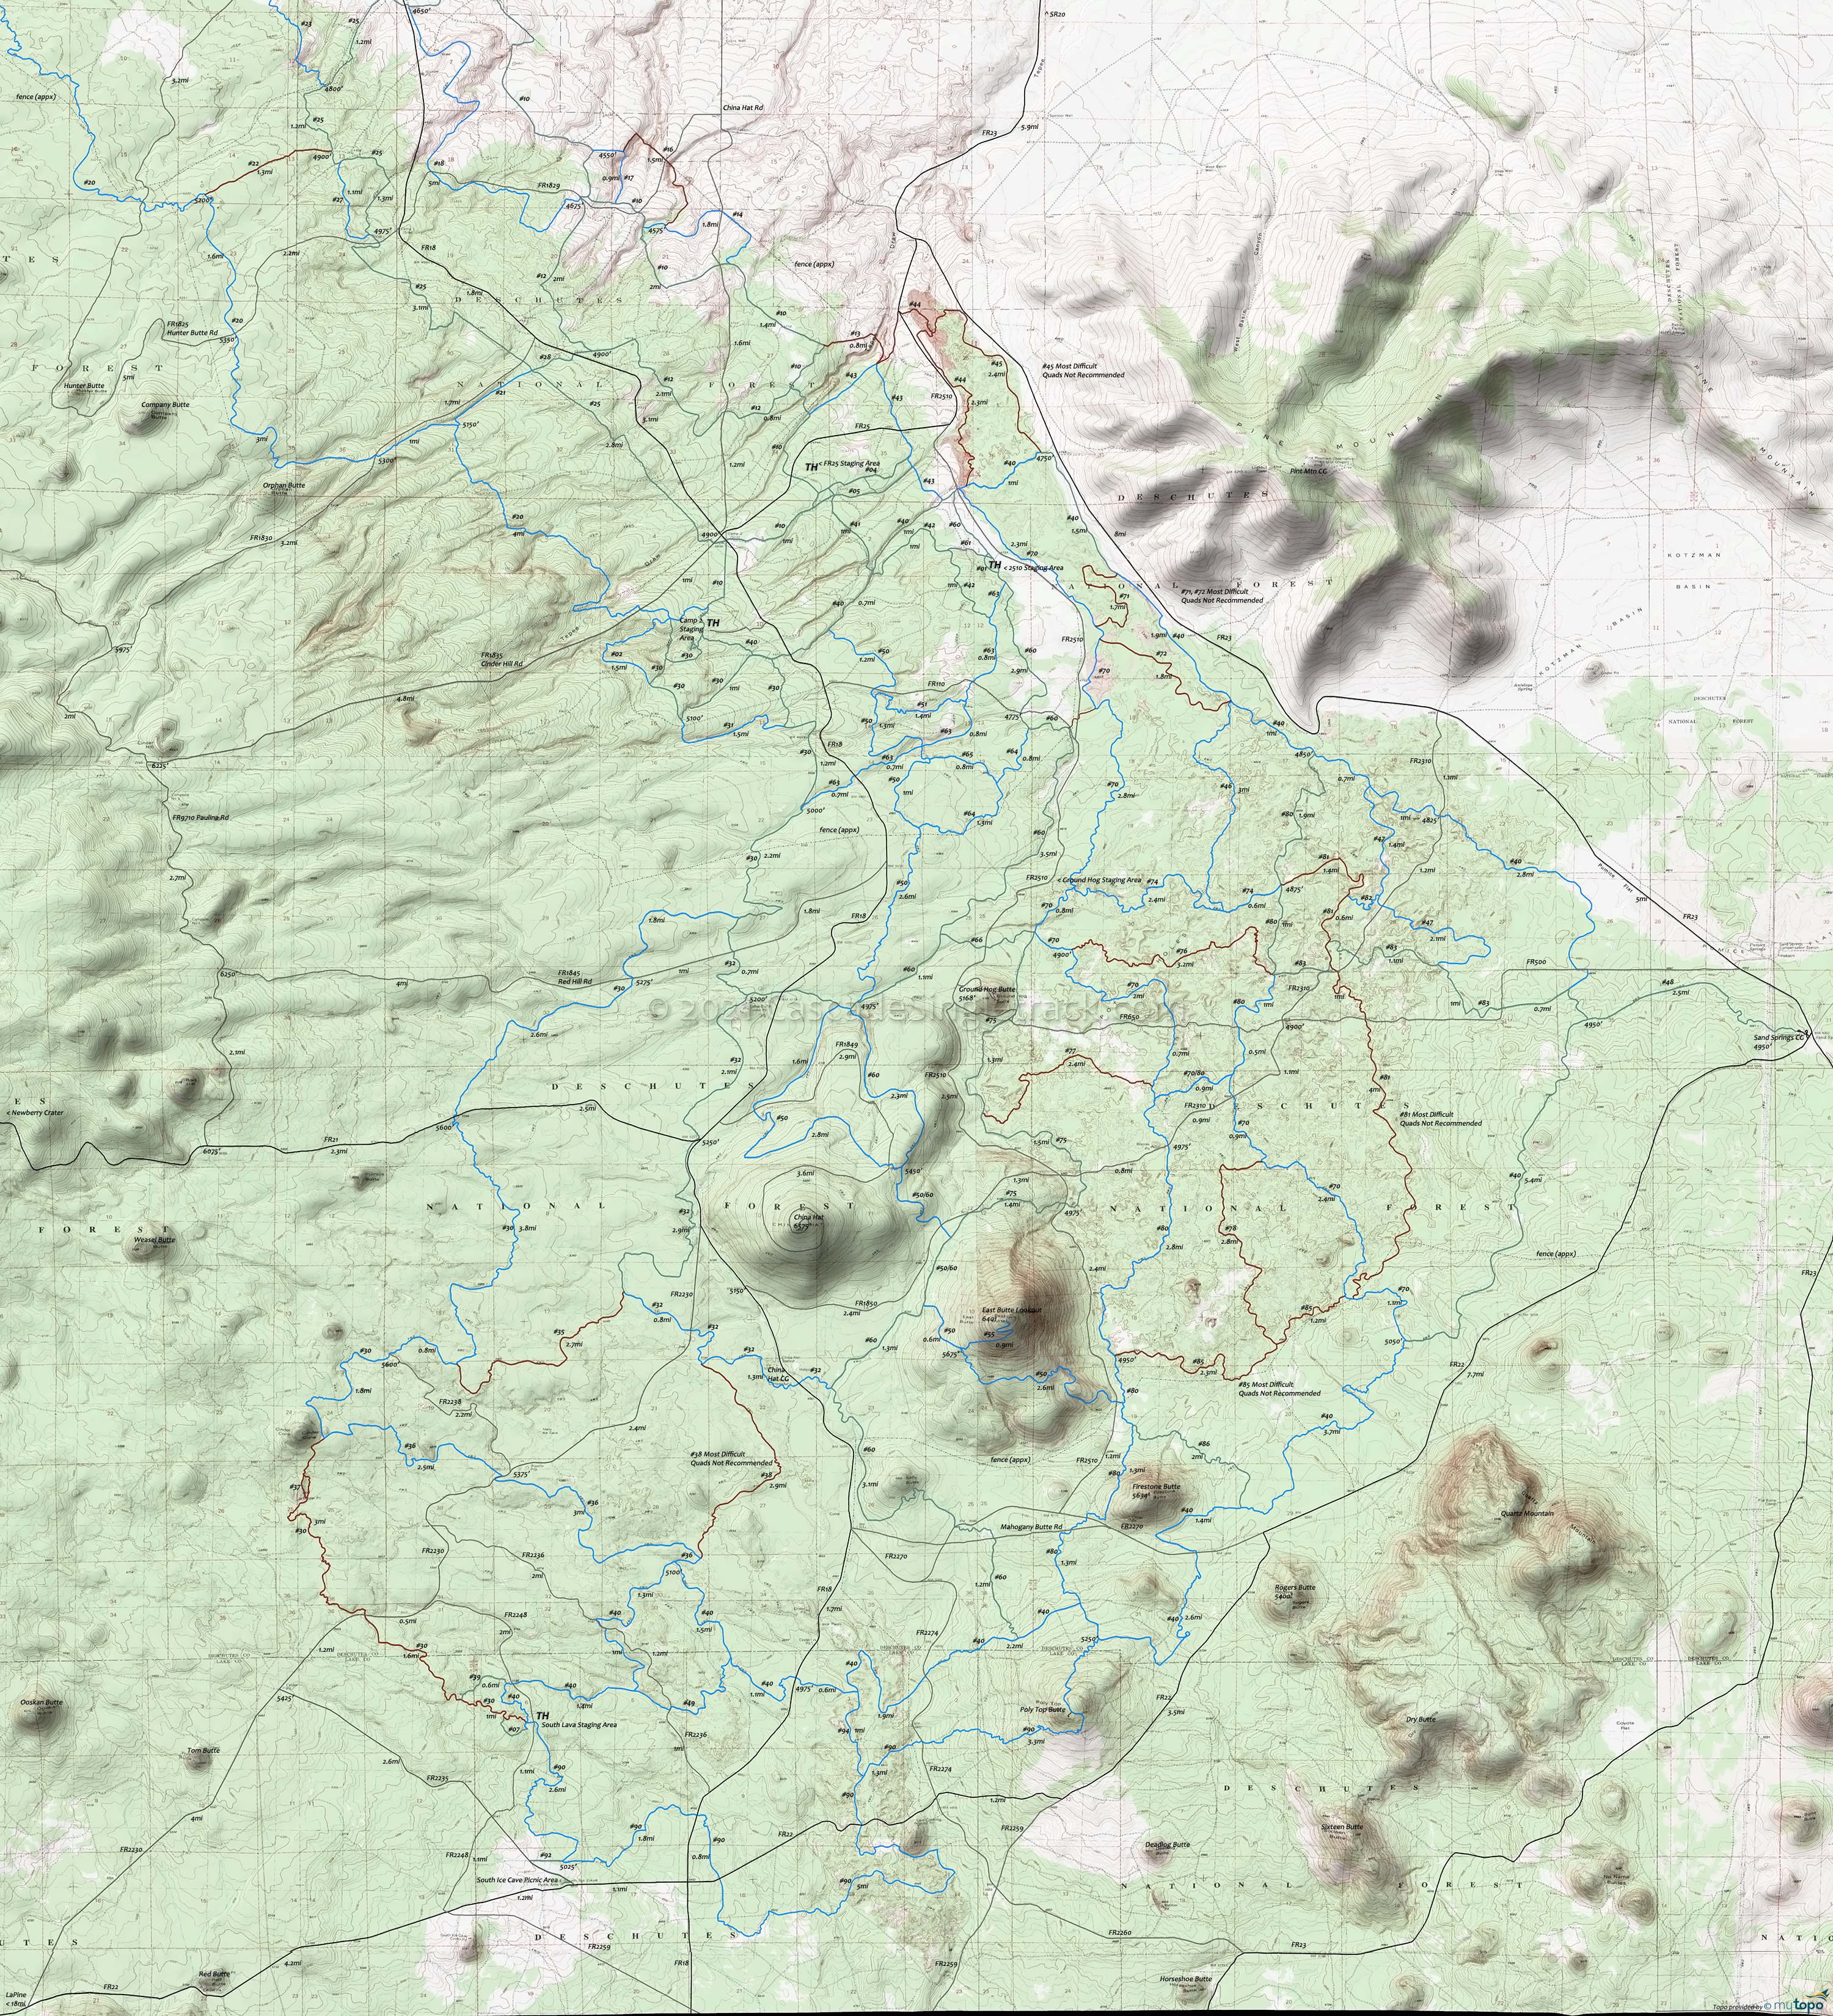 East Fort Rock OHV Trail Map